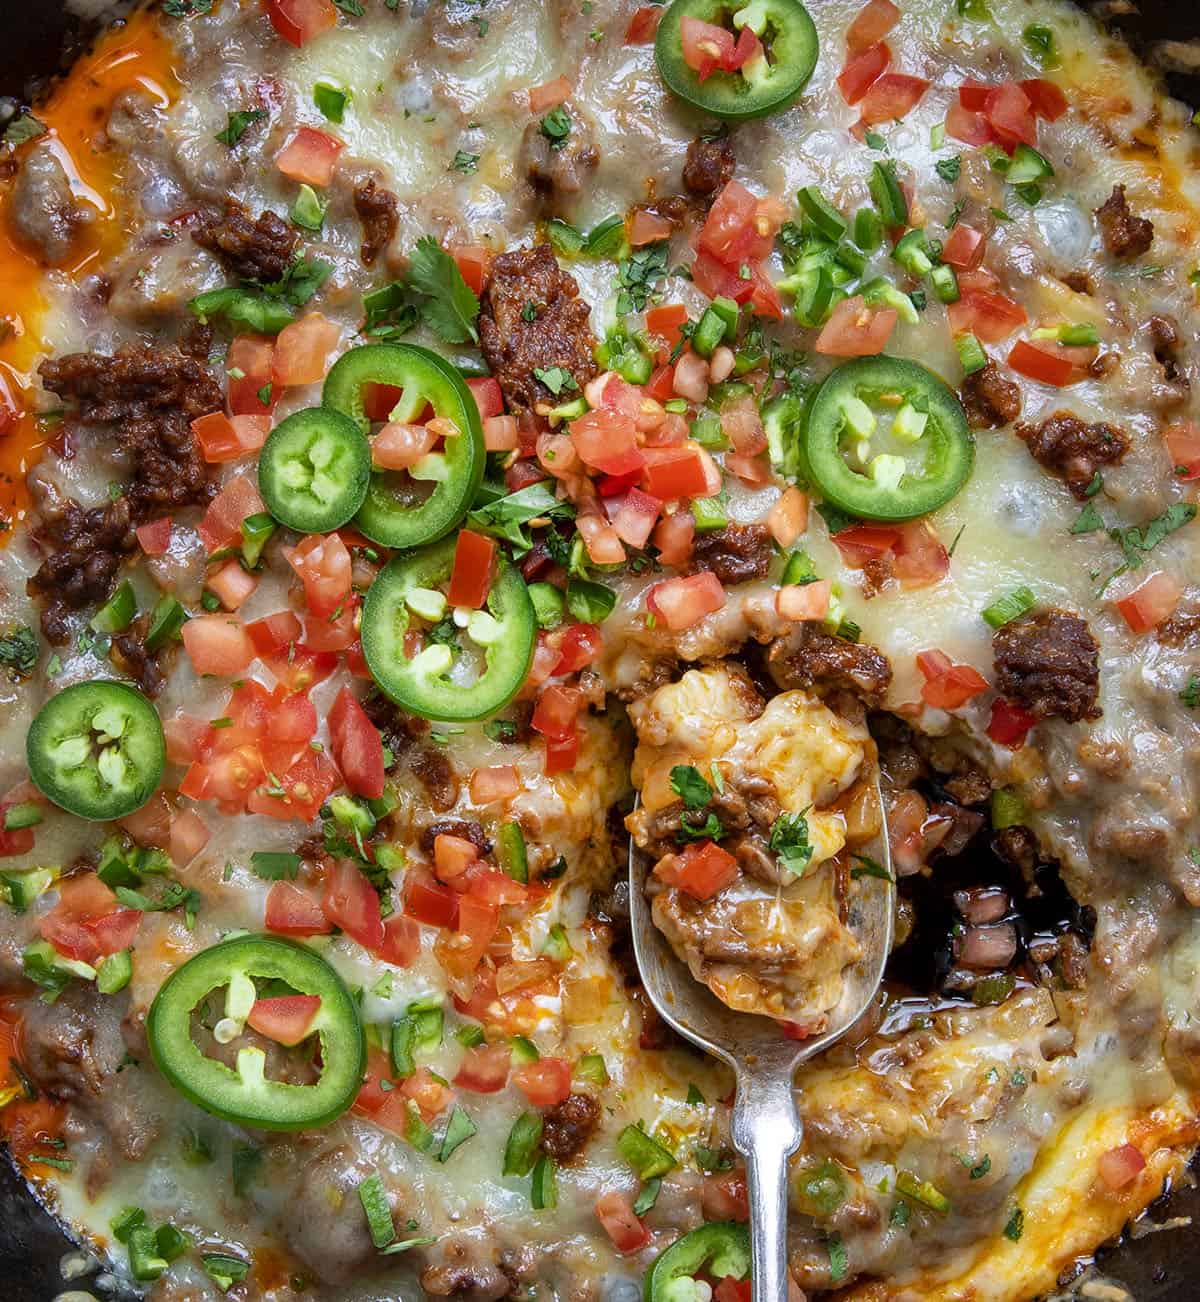 Spoon in a skillet of Queso Fundido.